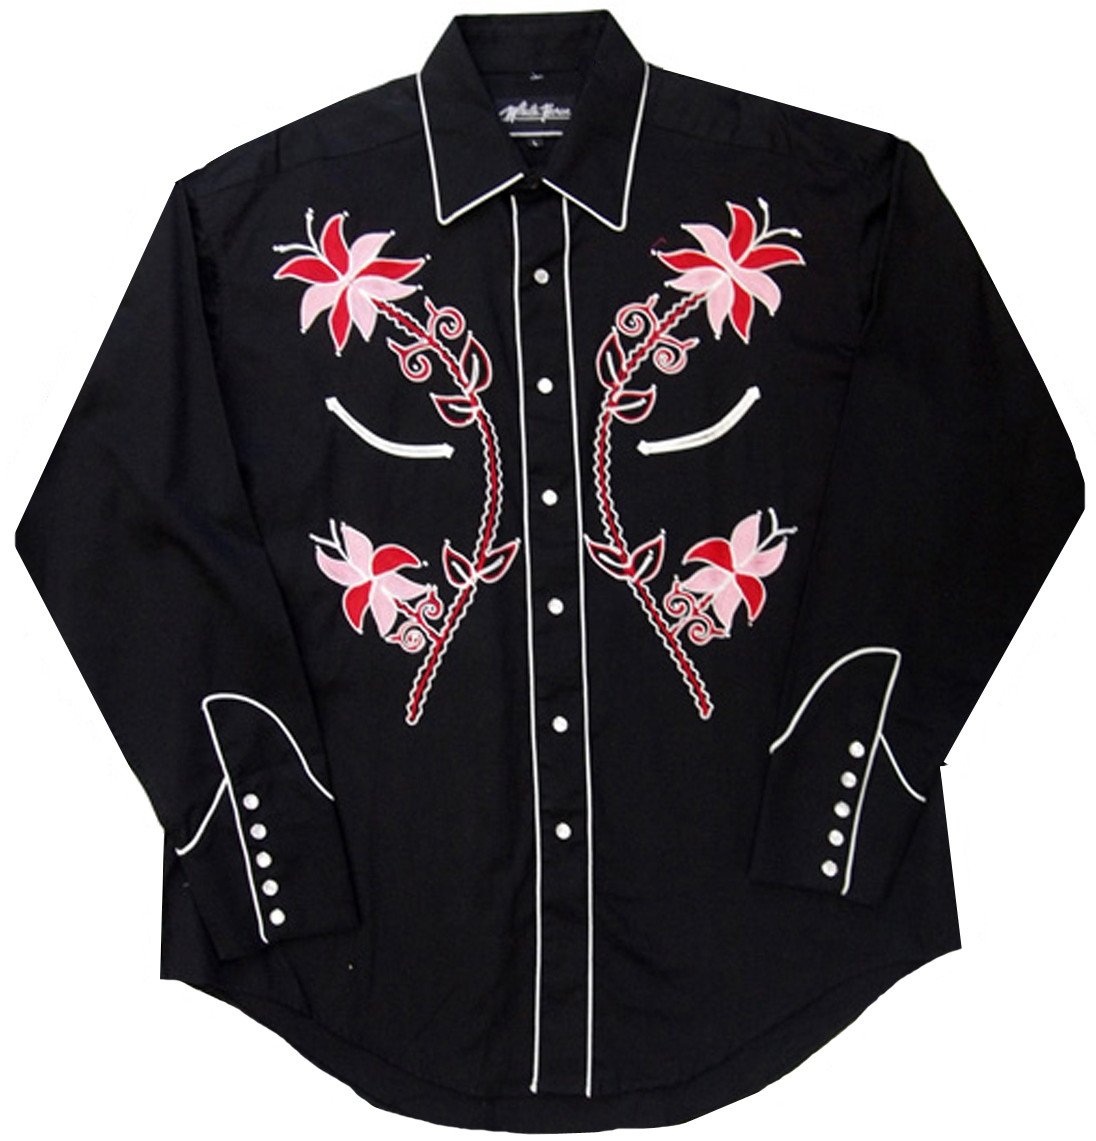 White Horse Apparel Women's Western Shirt Embroidered Floral Design on Black